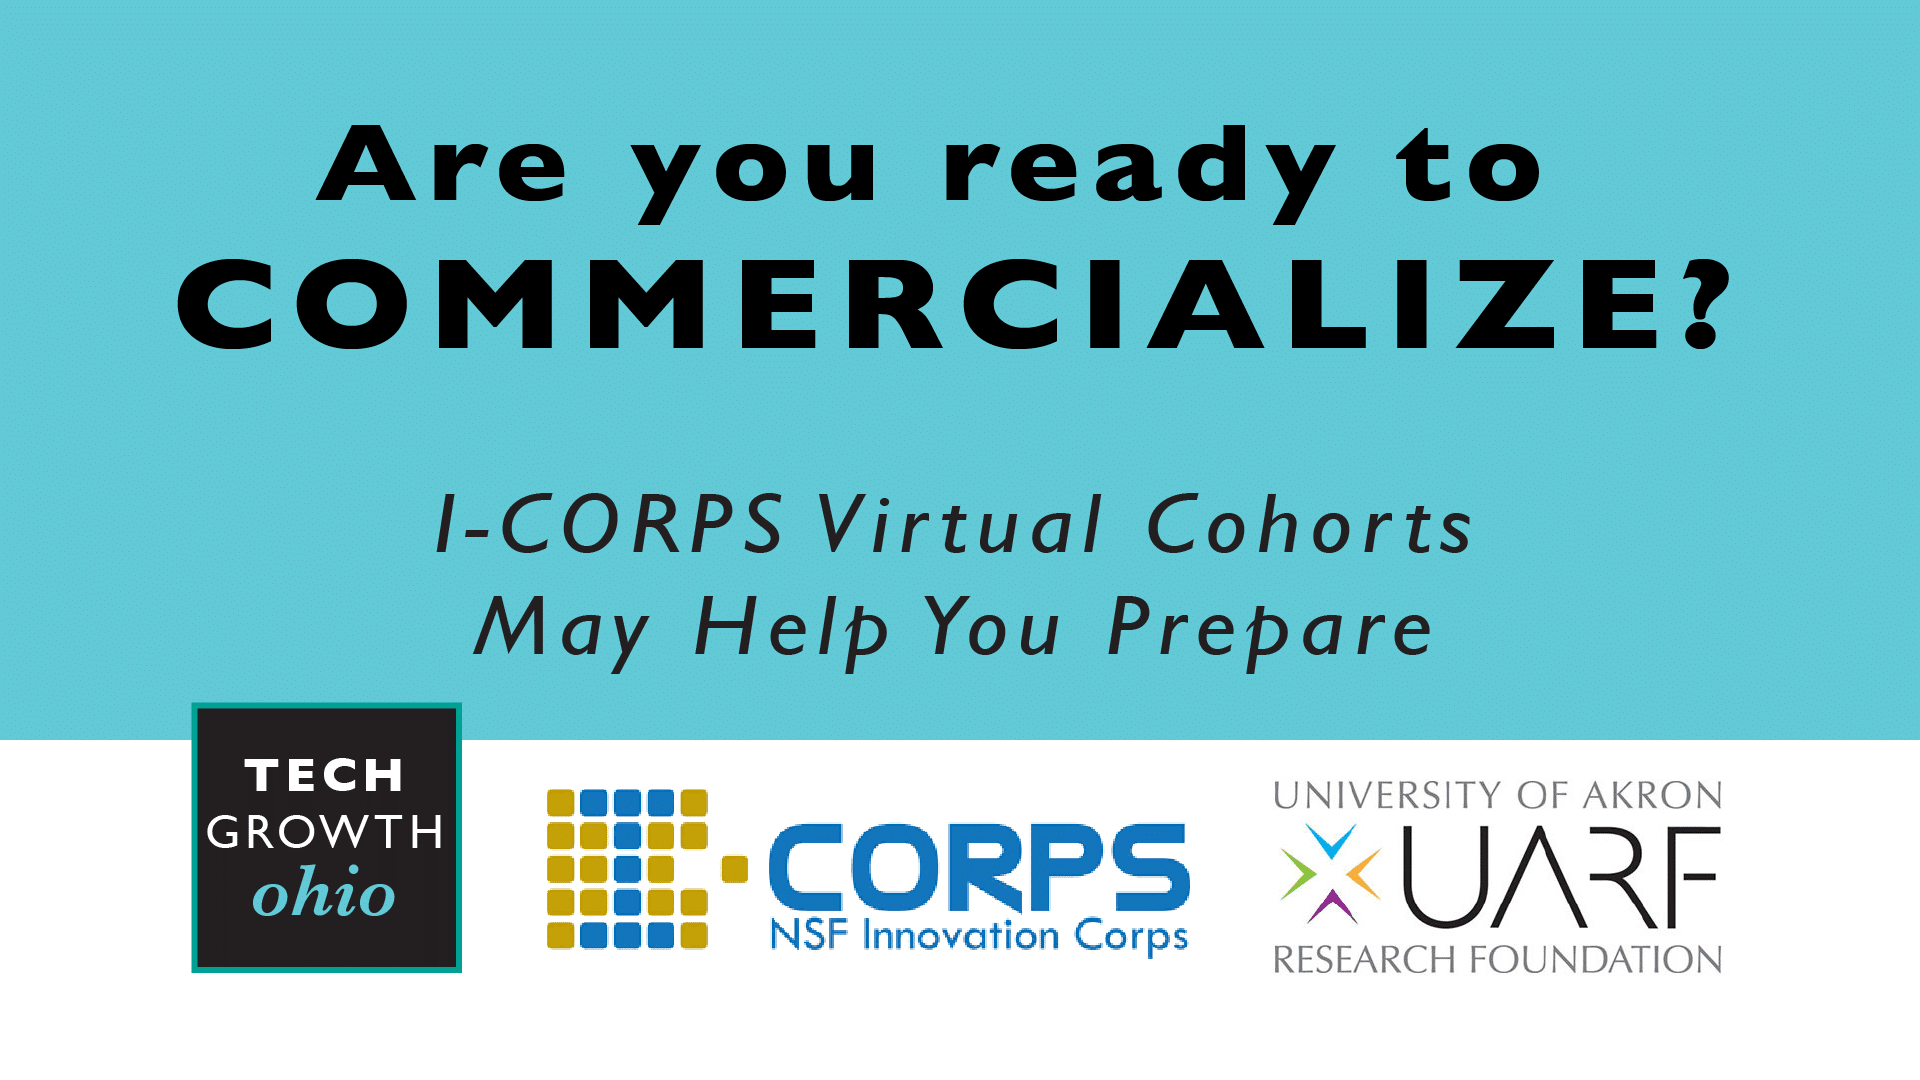 UARF and TechGROWTH I-Corps Are you ready to commercialize